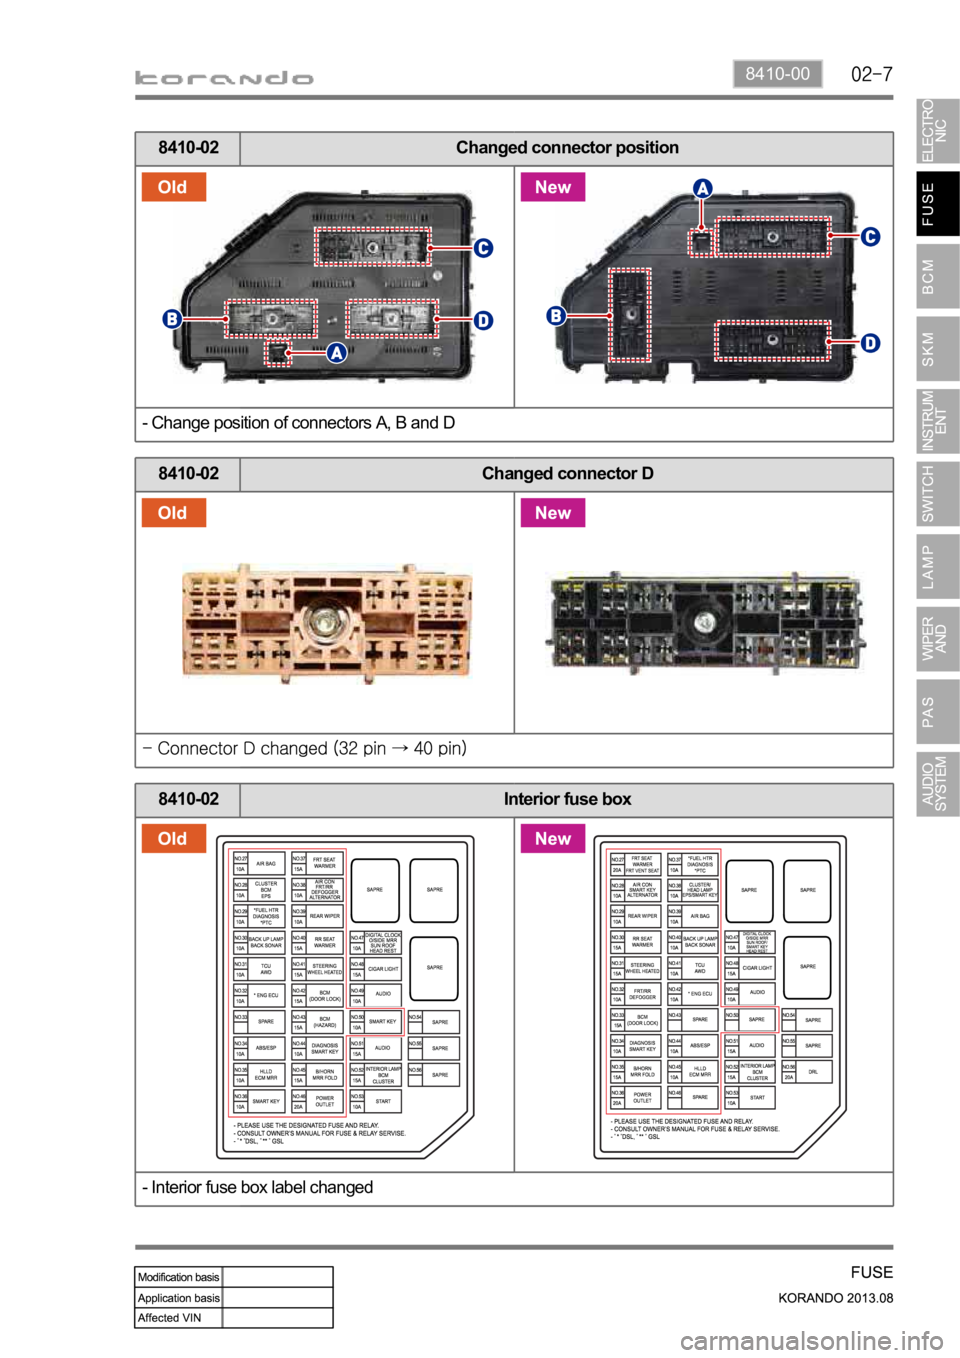 SSANGYONG KORANDO 2013  Service Manual 8410-00
8410-02 Changed connector position
- Change position of connectors A, B and D
8410-02 Changed connector D
8410-02 Interior fuse box
- Interior fuse box label changed 